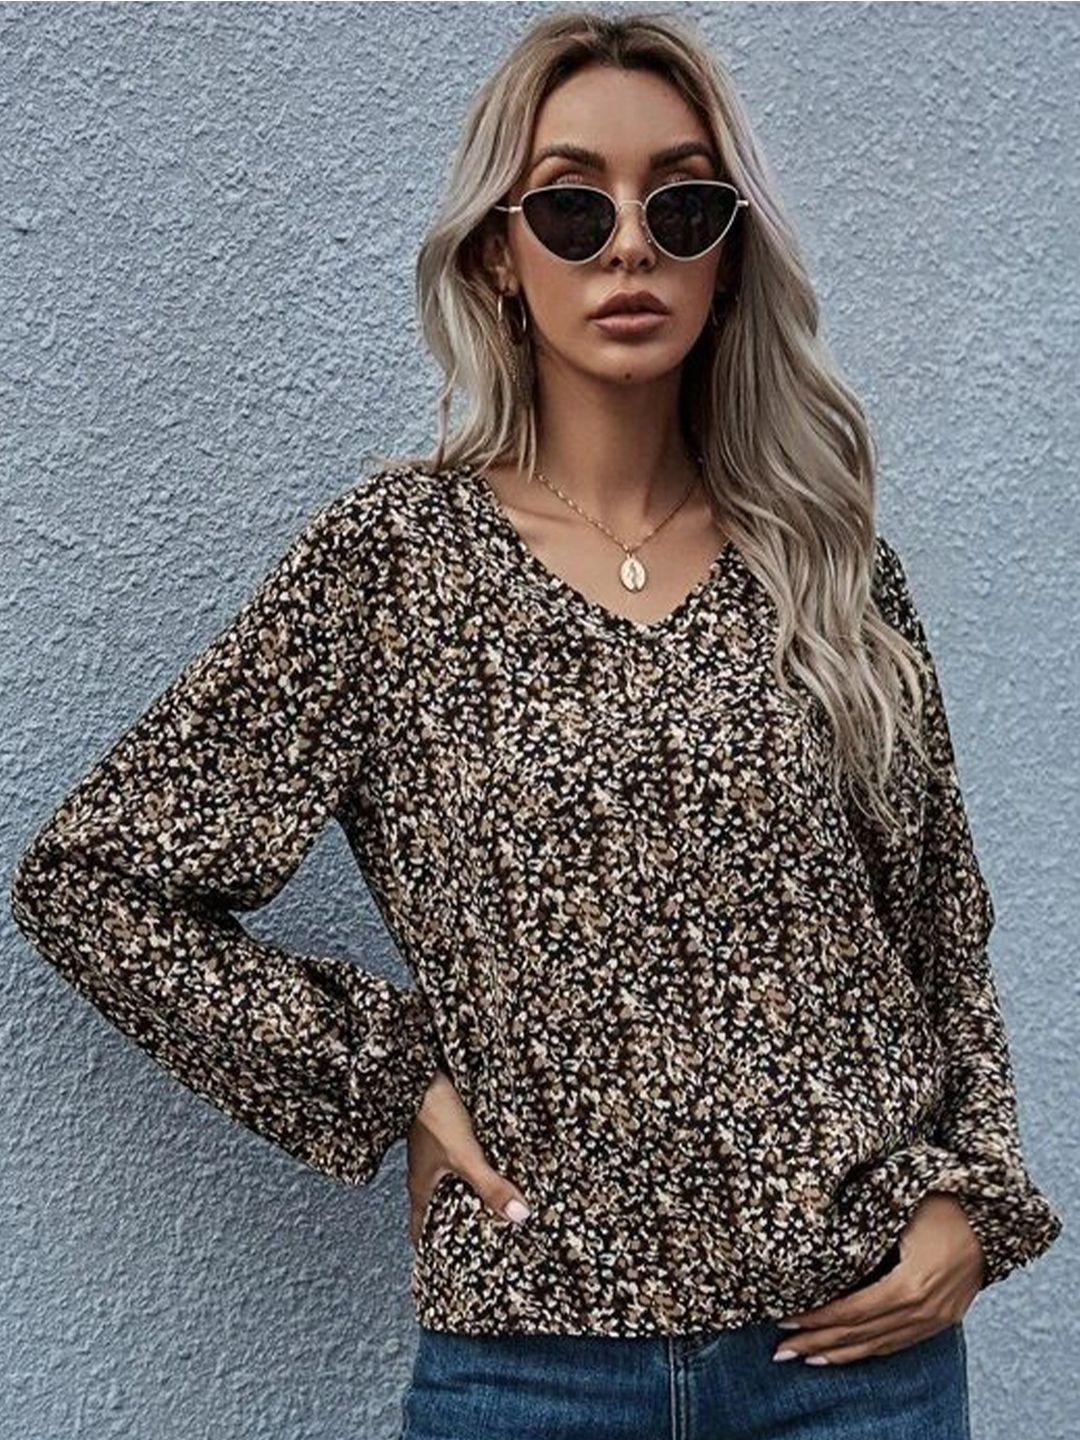 slyck floral printed v-neck cuffed sleeves top